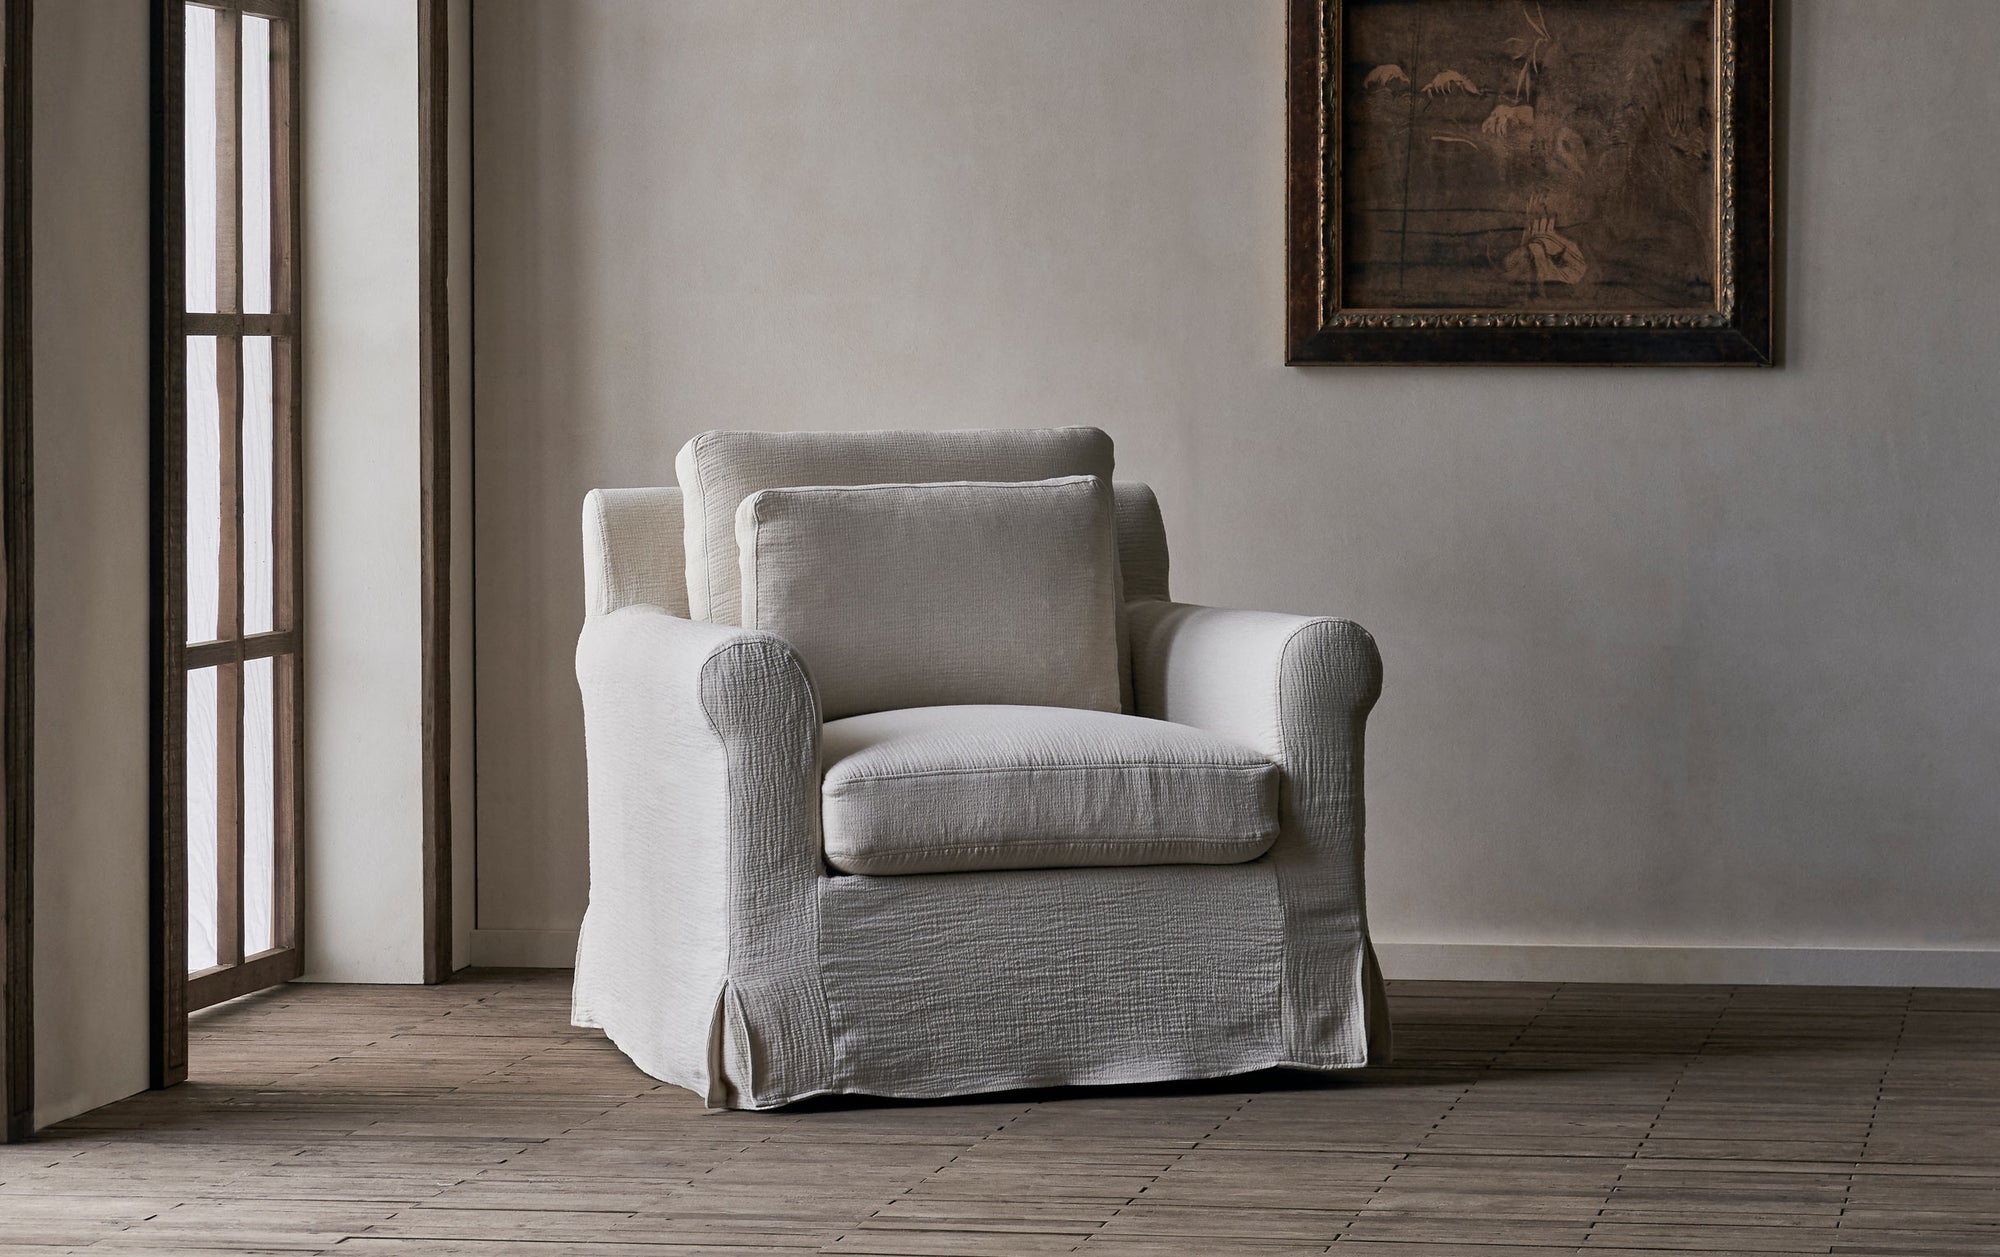 Elias Swivel Chair in Corn Silk, a light beige Washed Cotton Linen, in front of a greige wall with a hanging framed painting